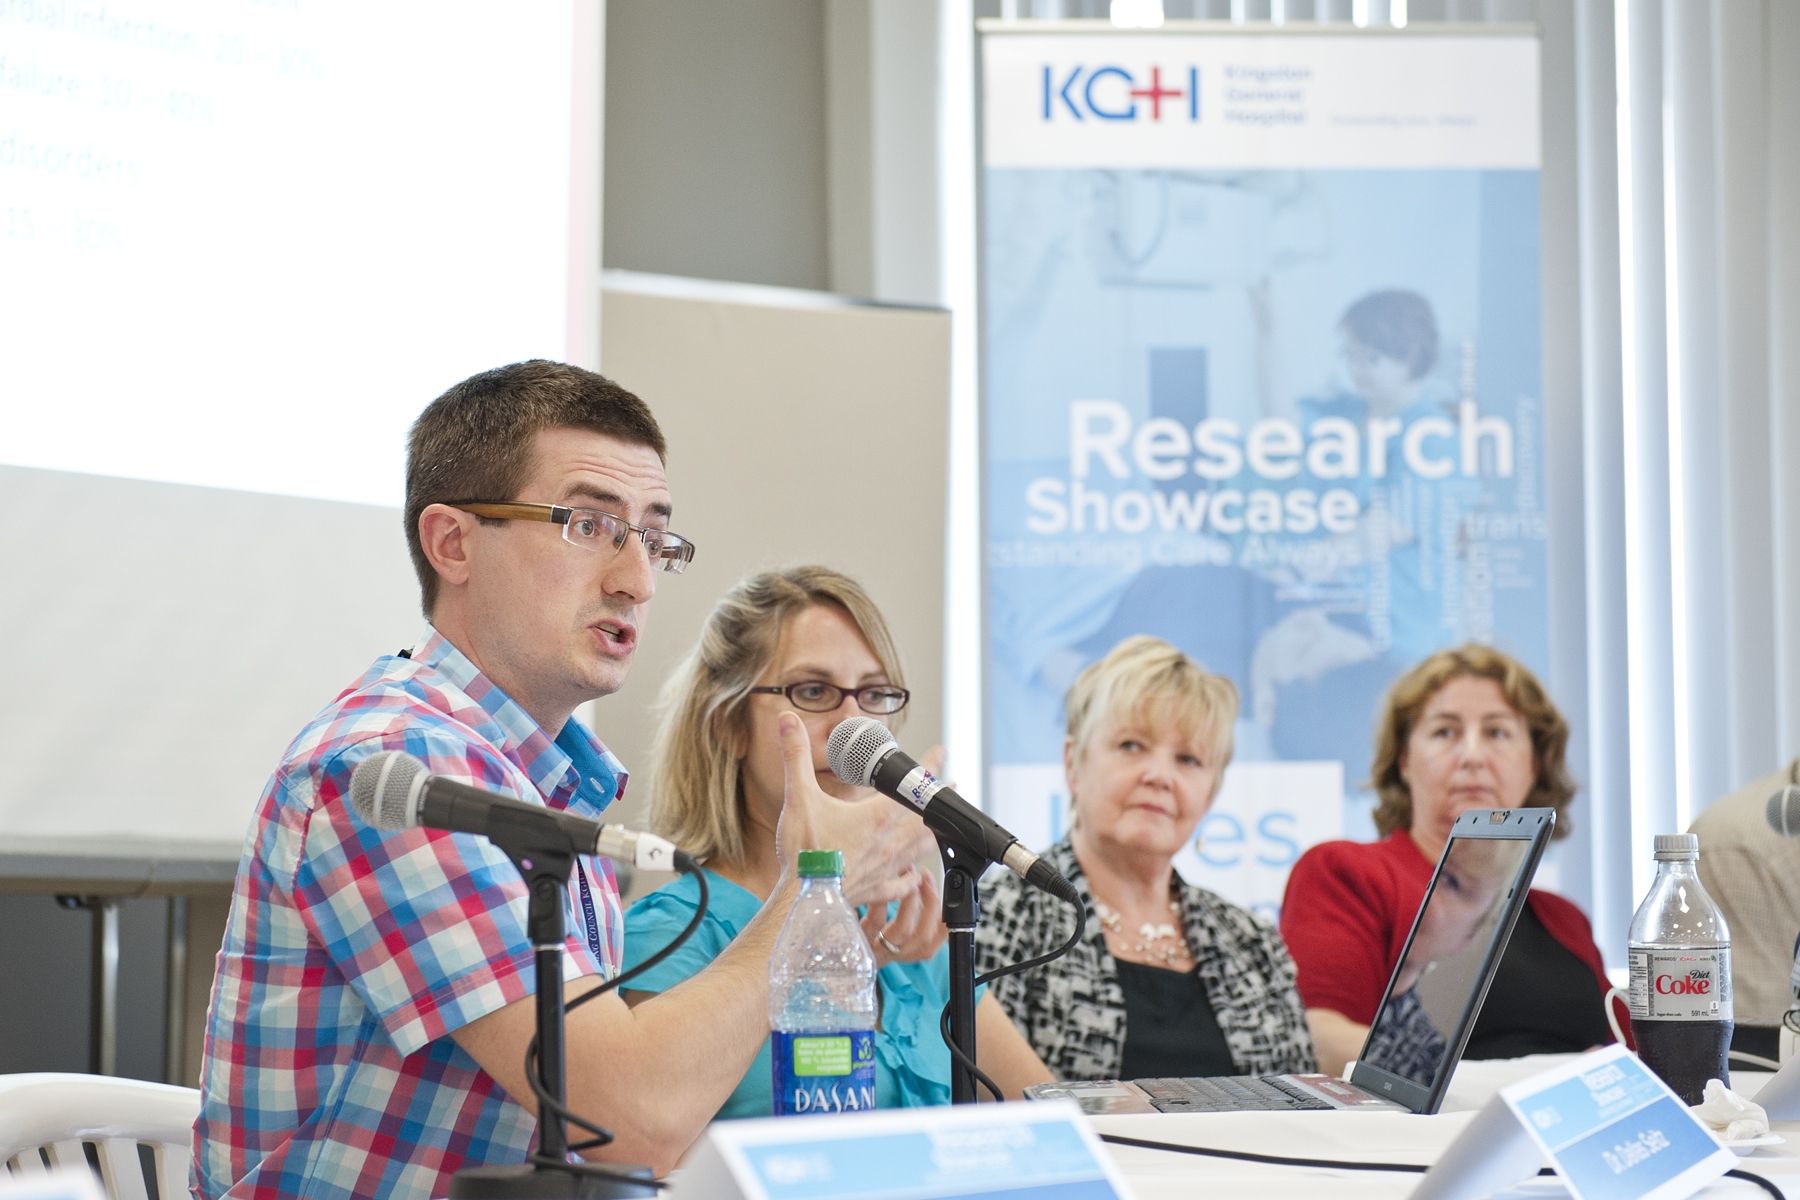 Researchs present their findings to a crowd at KGH.